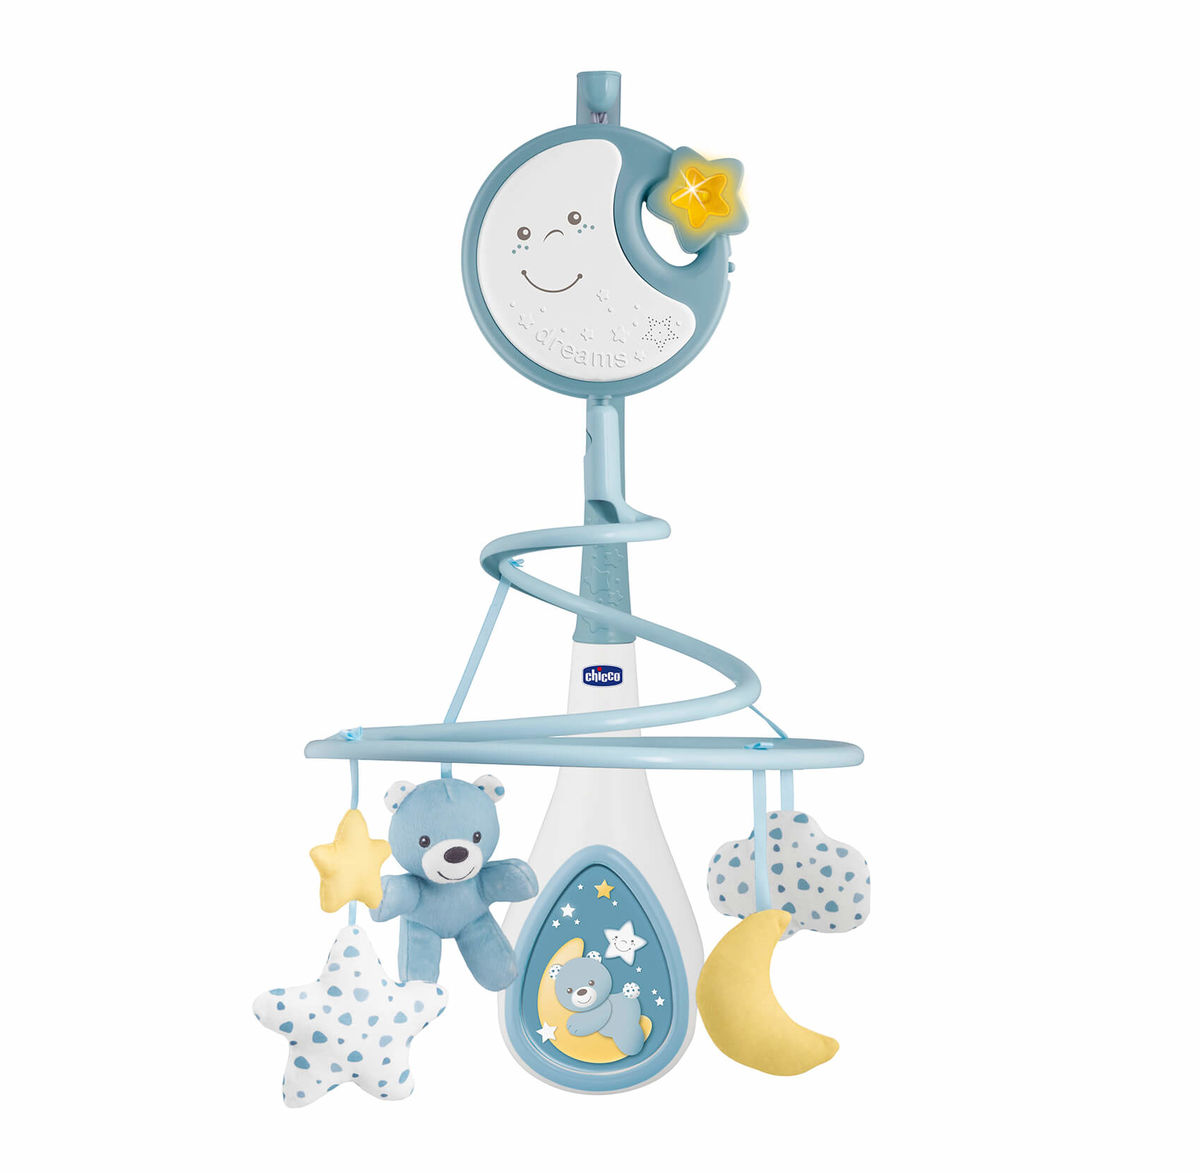 Image of Chicco First Dreams Next2Dreams Mobile blau bei nettoshop.ch